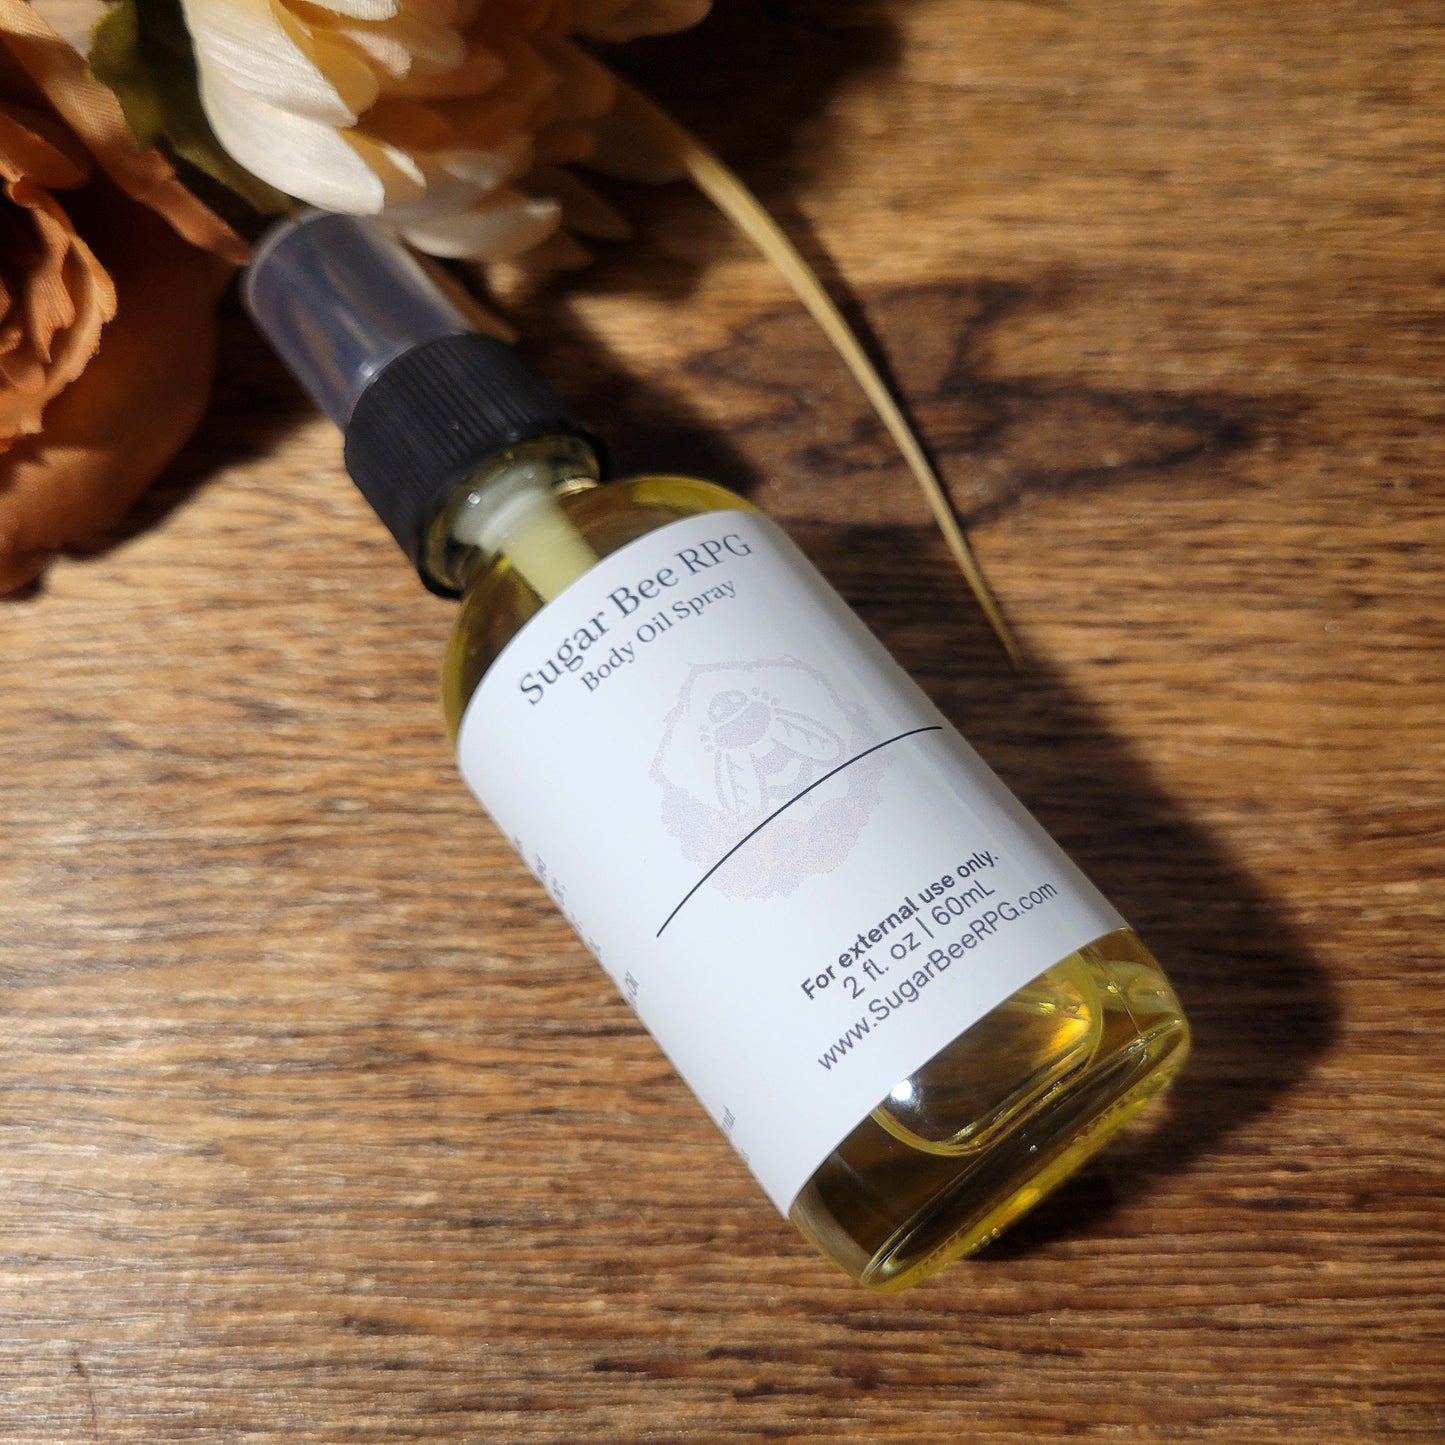 Made-to-Order Body Oil